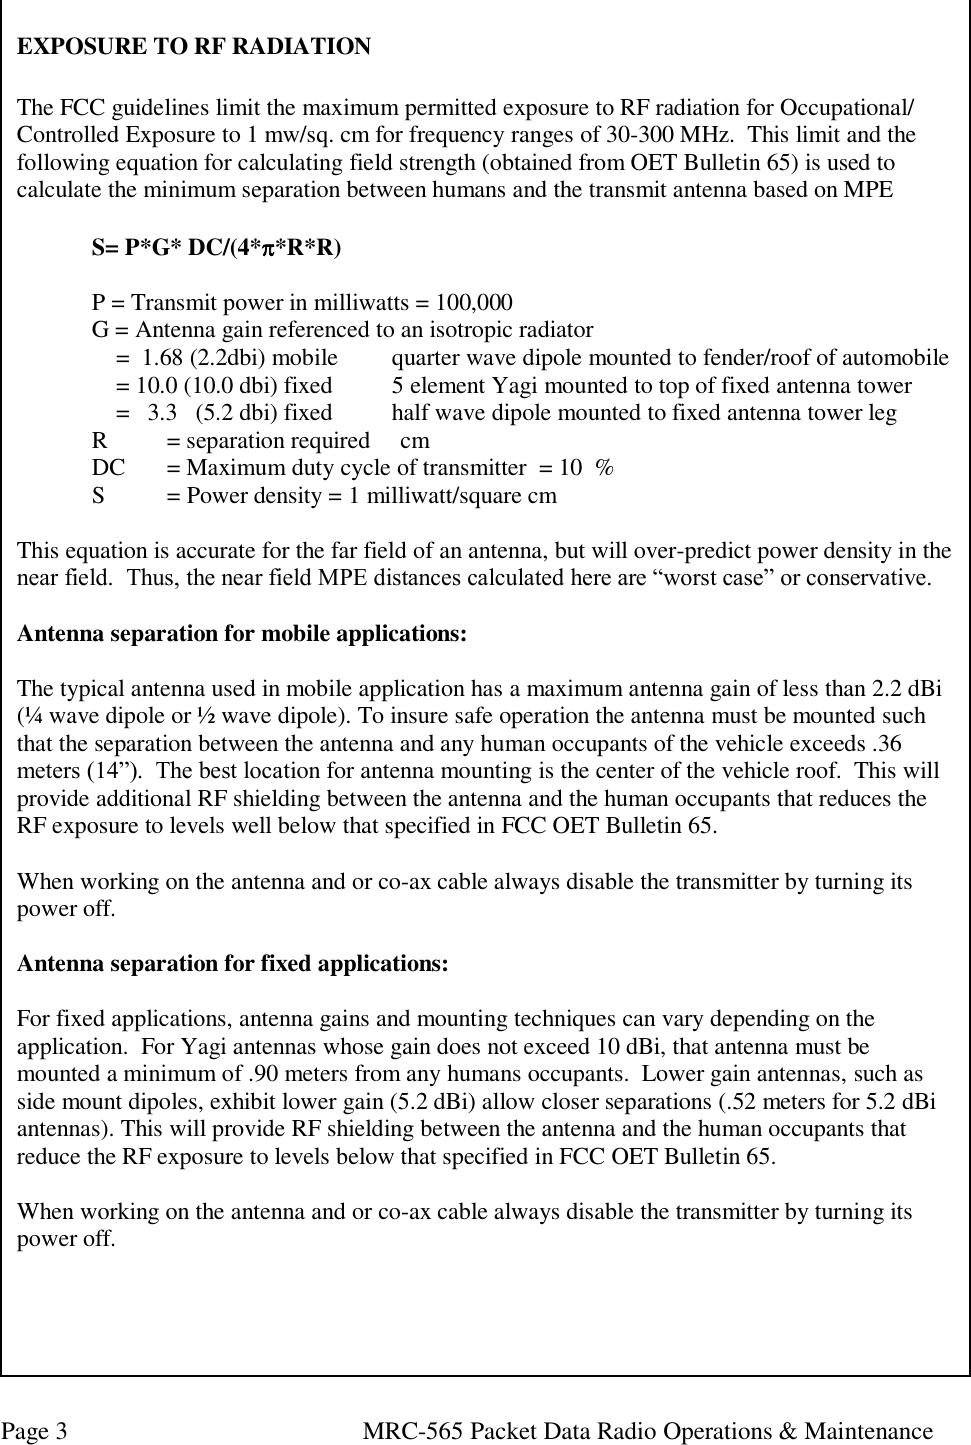 Page 3  MRC-565 Packet Data Radio Operations &amp; Maintenance EXPOSURE TO RF RADIATION  The FCC guidelines limit the maximum permitted exposure to RF radiation for Occupational/ Controlled Exposure to 1 mw/sq. cm for frequency ranges of 30-300 MHz.  This limit and the following equation for calculating field strength (obtained from OET Bulletin 65) is used to calculate the minimum separation between humans and the transmit antenna based on MPE   S= P*G* DC/(4**R*R)     P = Transmit power in milliwatts = 100,000   G = Antenna gain referenced to an isotropic radiator        =  1.68 (2.2dbi) mobile    quarter wave dipole mounted to fender/roof of automobile     = 10.0 (10.0 dbi) fixed    5 element Yagi mounted to top of fixed antenna tower       =   3.3   (5.2 dbi) fixed  half wave dipole mounted to fixed antenna tower leg  R   = separation required     cm  DC  = Maximum duty cycle of transmitter  = 10  %  S   = Power density = 1 milliwatt/square cm  This equation is accurate for the far field of an antenna, but will over-predict power density in the near field.  Thus, the near field MPE distances calculated here are “worst case” or conservative.   Antenna separation for mobile applications:  The typical antenna used in mobile application has a maximum antenna gain of less than 2.2 dBi (¼ wave dipole or ½ wave dipole). To insure safe operation the antenna must be mounted such that the separation between the antenna and any human occupants of the vehicle exceeds .36 meters (14”).  The best location for antenna mounting is the center of the vehicle roof.  This will provide additional RF shielding between the antenna and the human occupants that reduces the RF exposure to levels well below that specified in FCC OET Bulletin 65.   When working on the antenna and or co-ax cable always disable the transmitter by turning its power off.  Antenna separation for fixed applications:  For fixed applications, antenna gains and mounting techniques can vary depending on the application.  For Yagi antennas whose gain does not exceed 10 dBi, that antenna must be mounted a minimum of .90 meters from any humans occupants.  Lower gain antennas, such as side mount dipoles, exhibit lower gain (5.2 dBi) allow closer separations (.52 meters for 5.2 dBi antennas). This will provide RF shielding between the antenna and the human occupants that reduce the RF exposure to levels below that specified in FCC OET Bulletin 65.   When working on the antenna and or co-ax cable always disable the transmitter by turning its power off.   